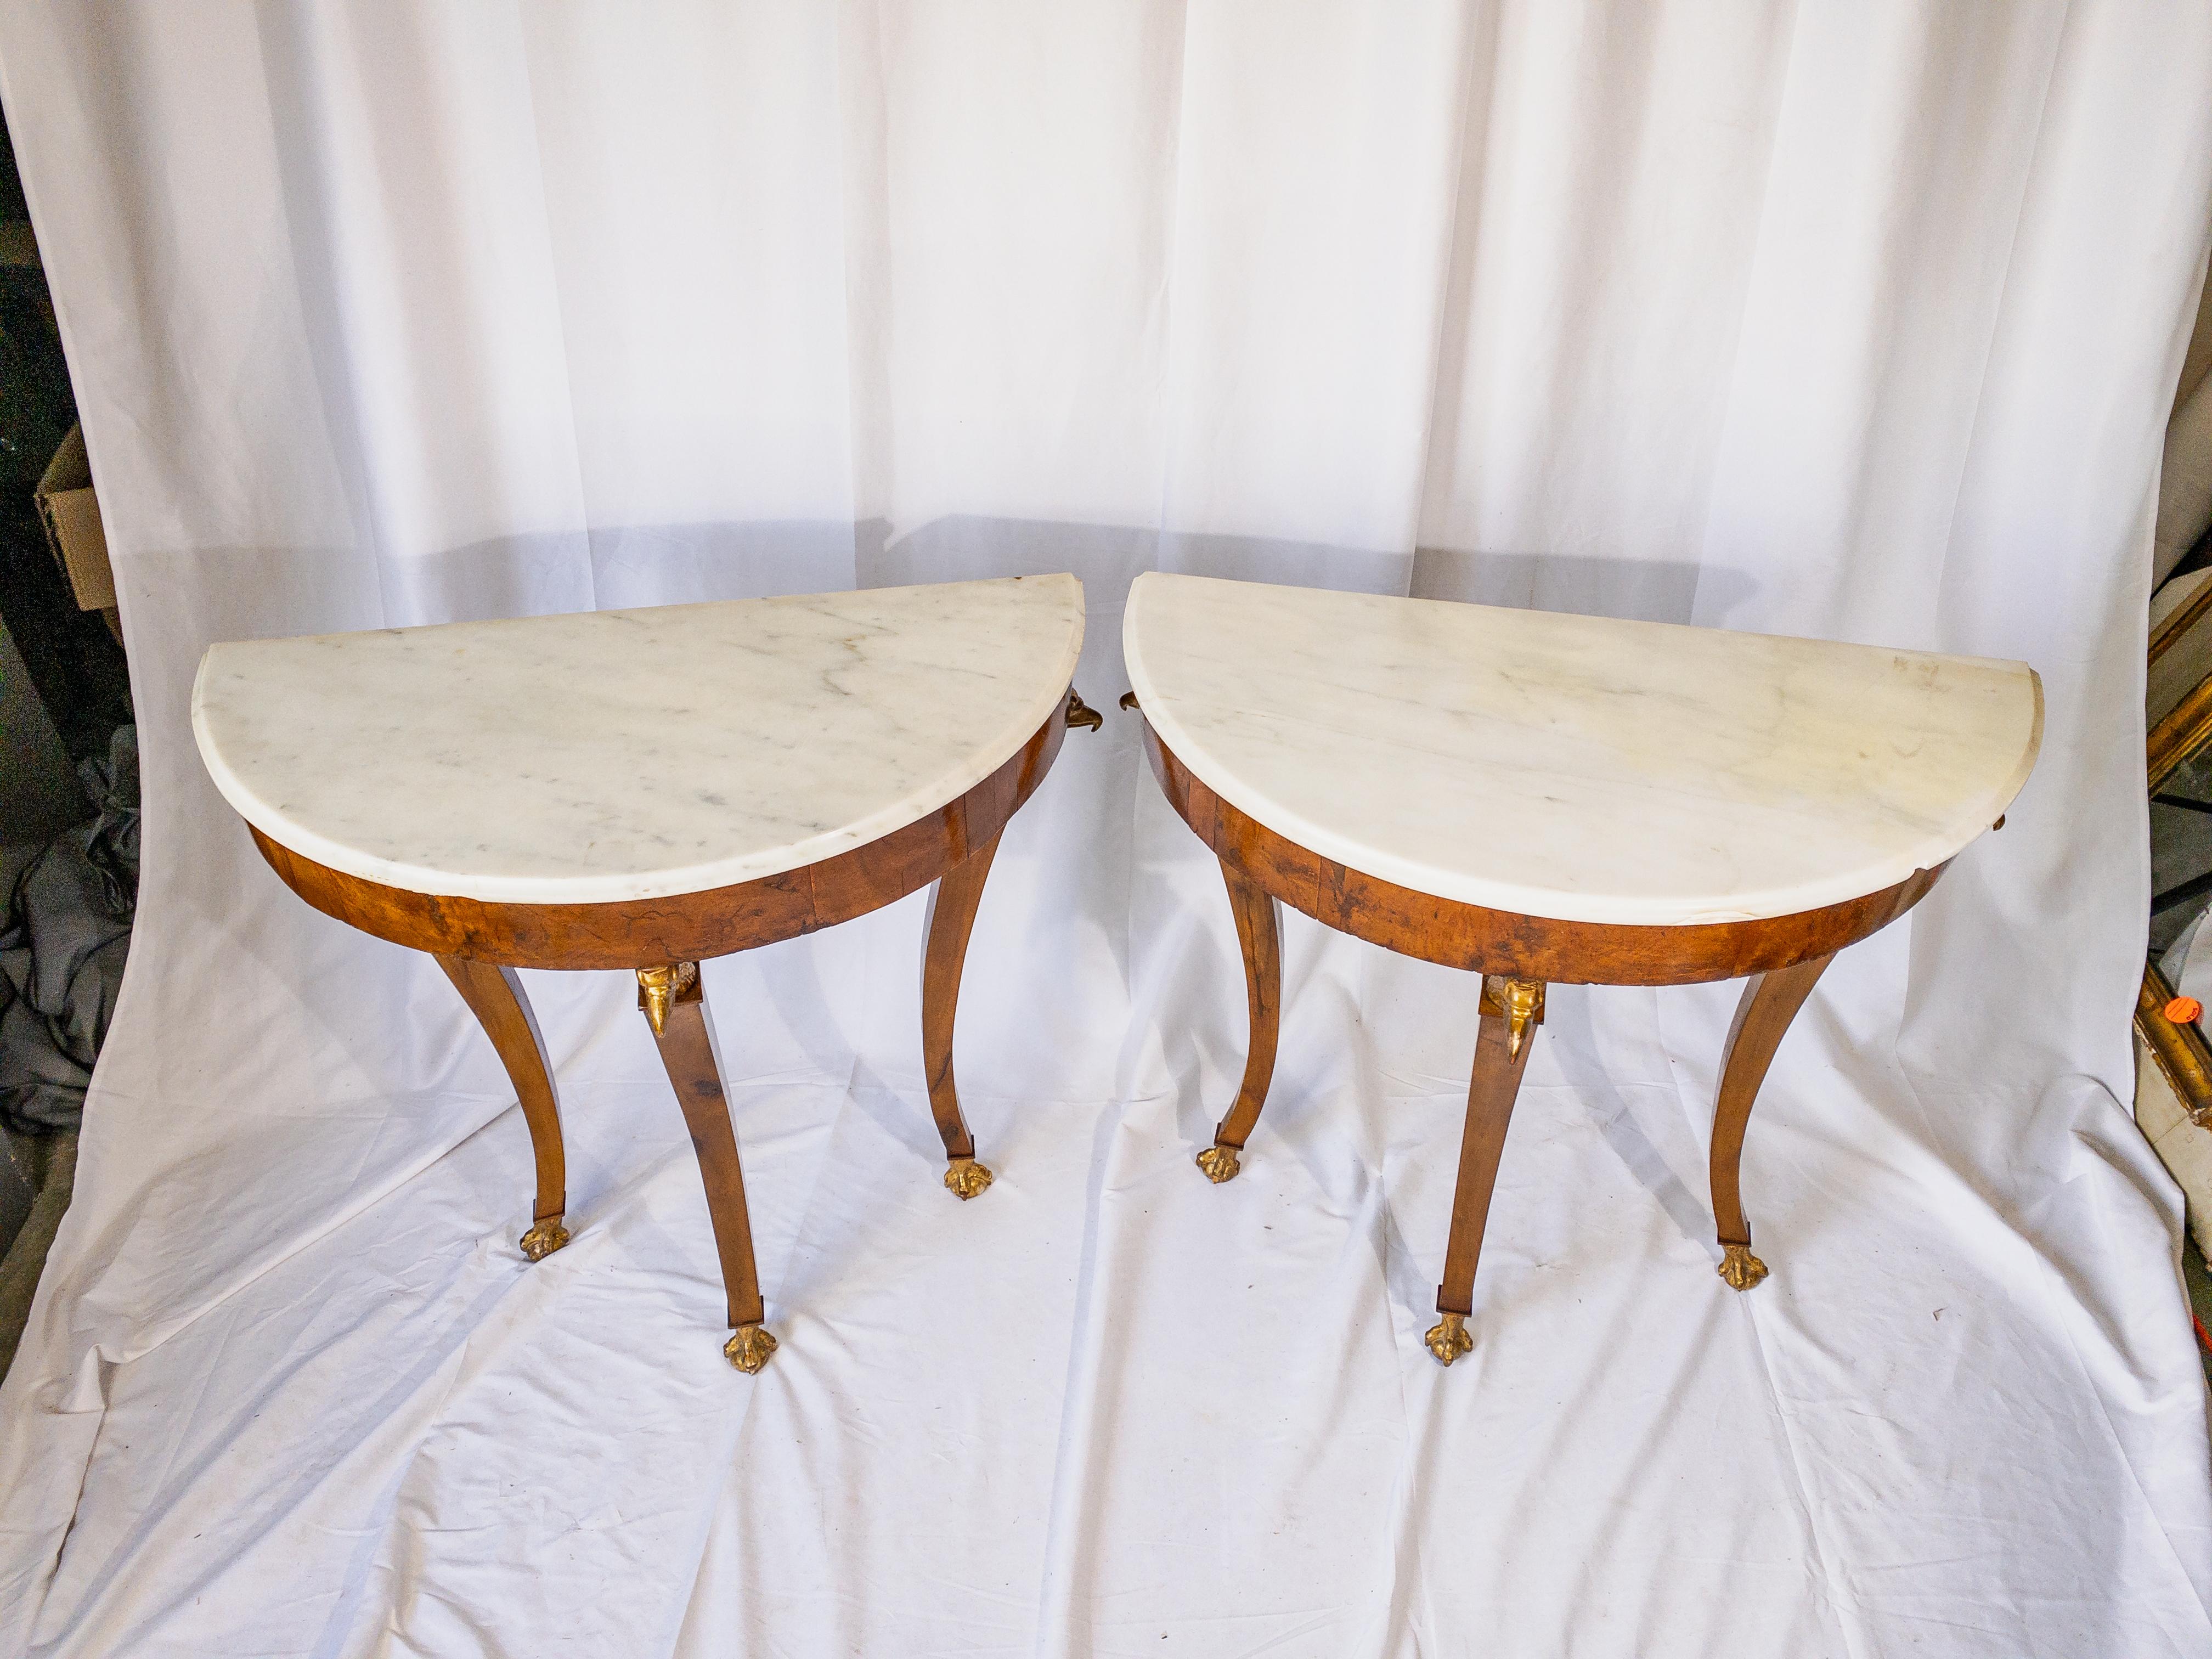 Pair of 18th Century Italian Marble Top Demi-lune Tables For Sale 4